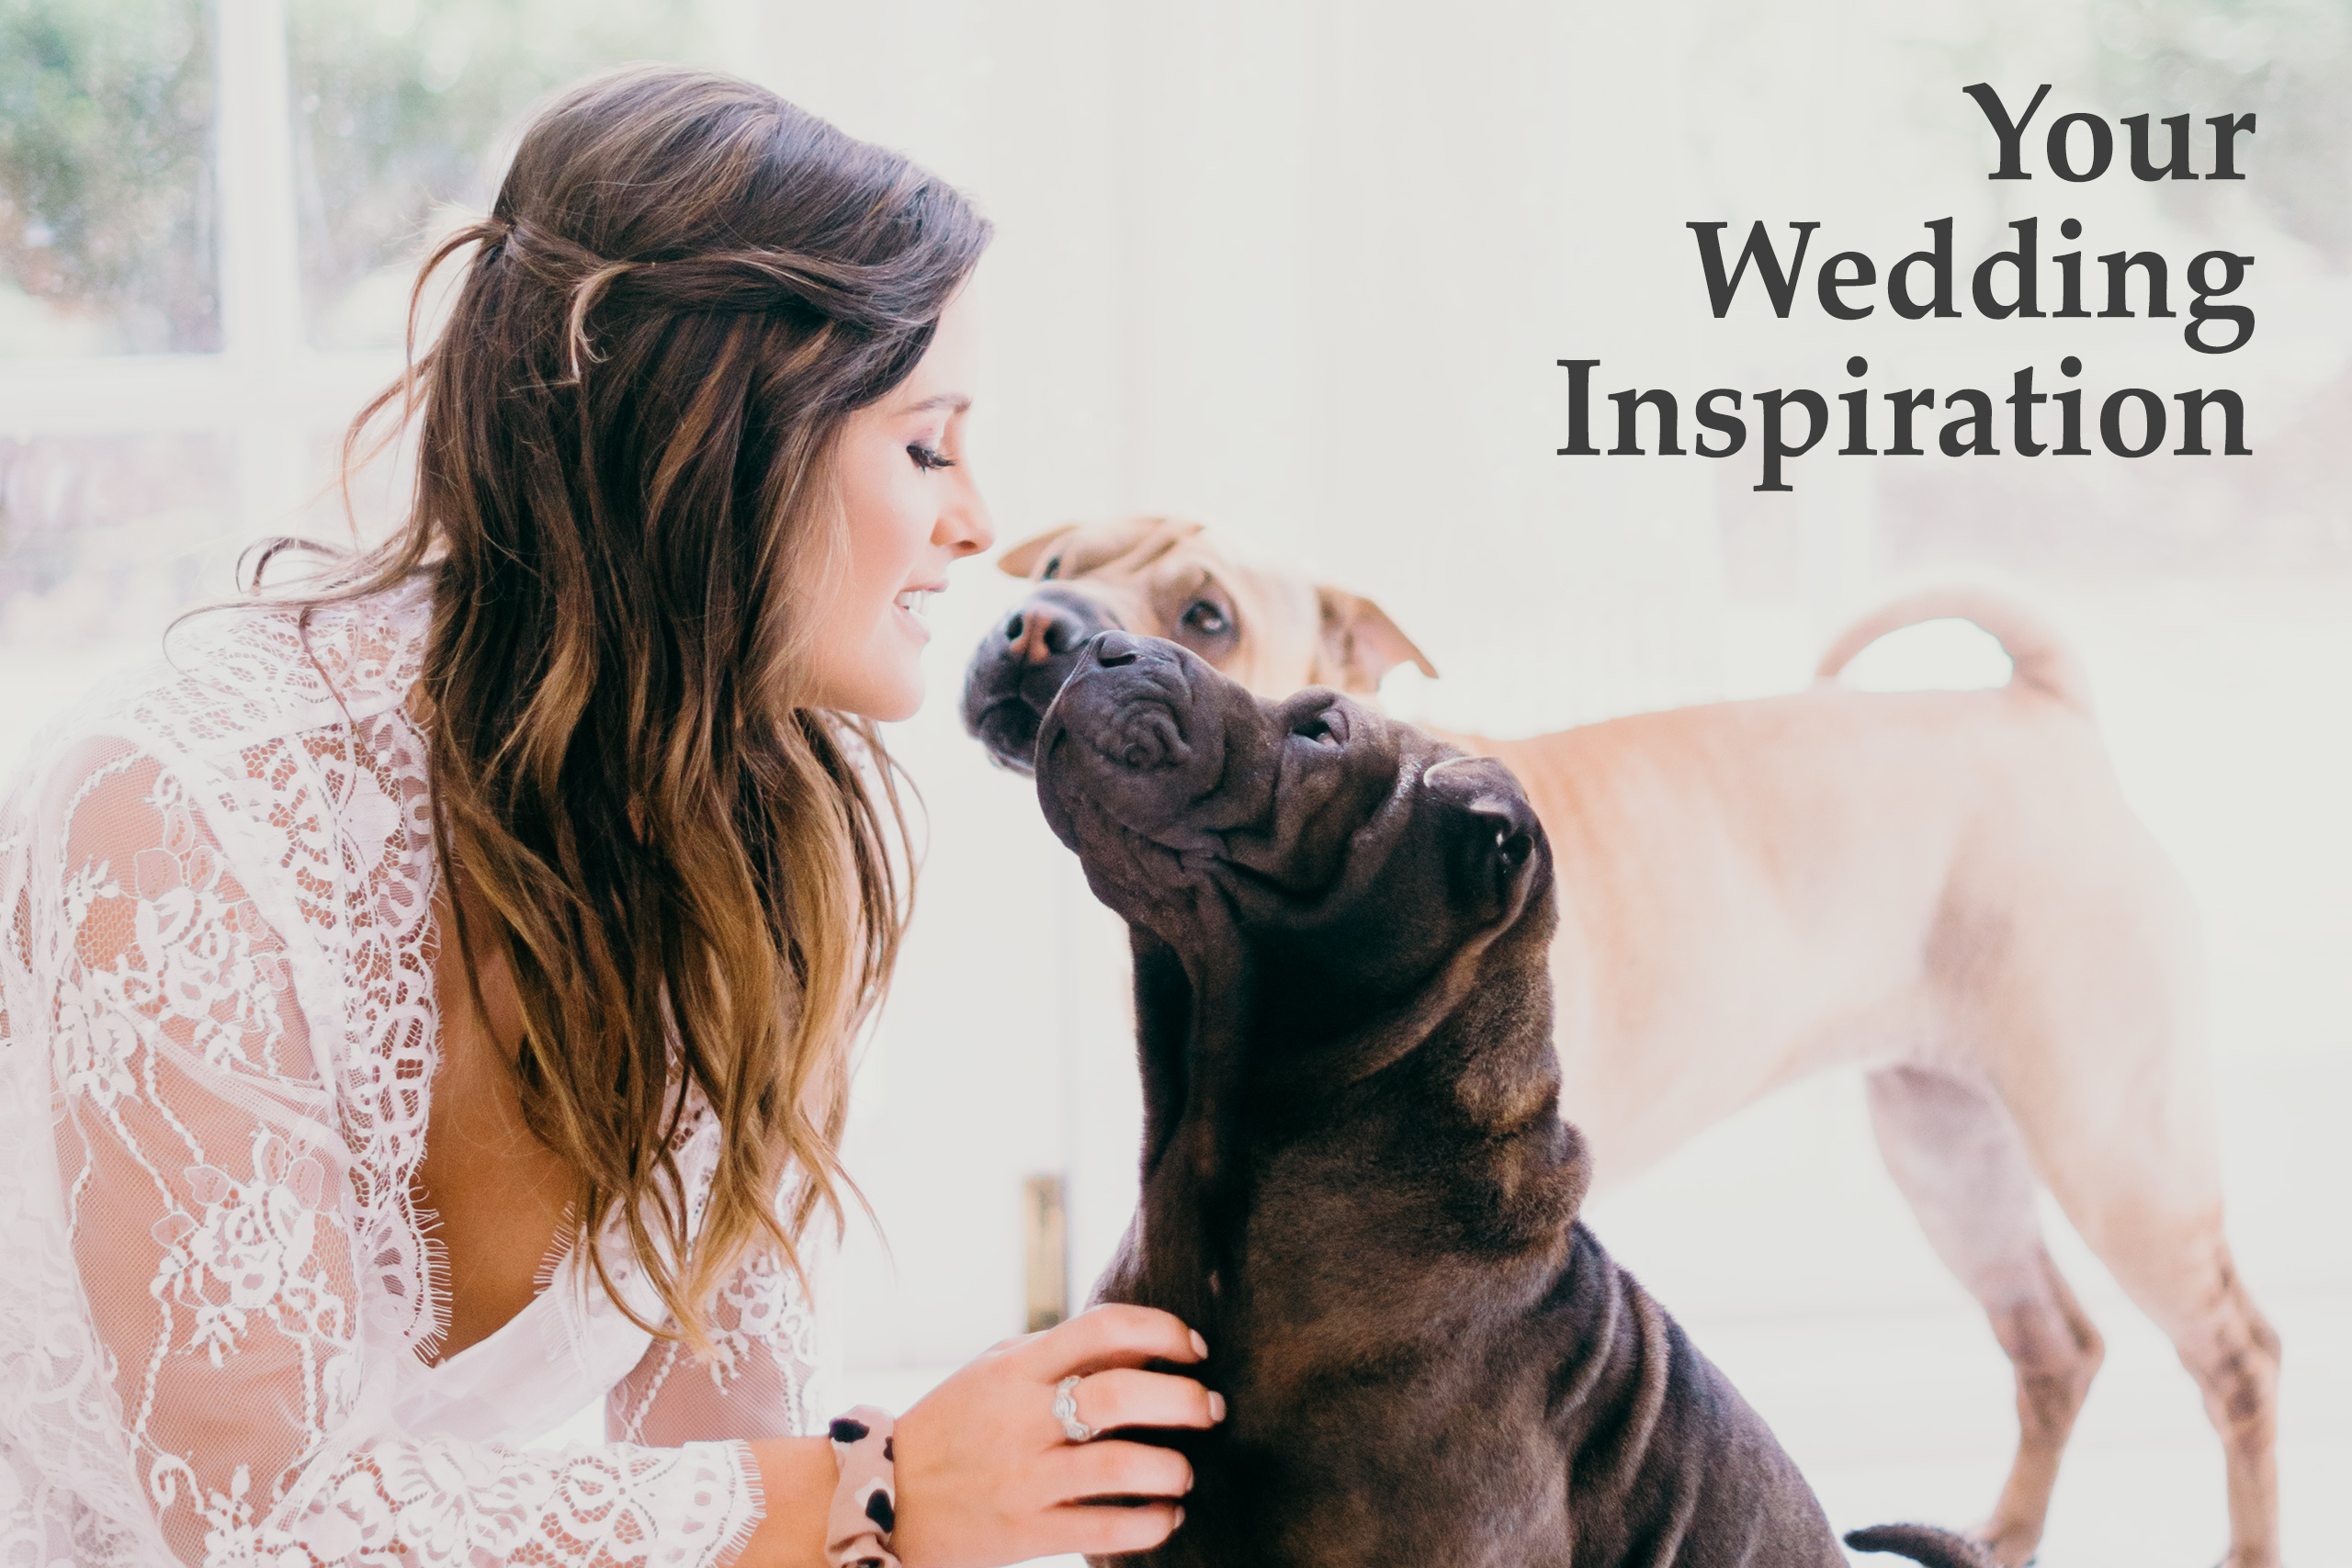 Brides image with her loving pups